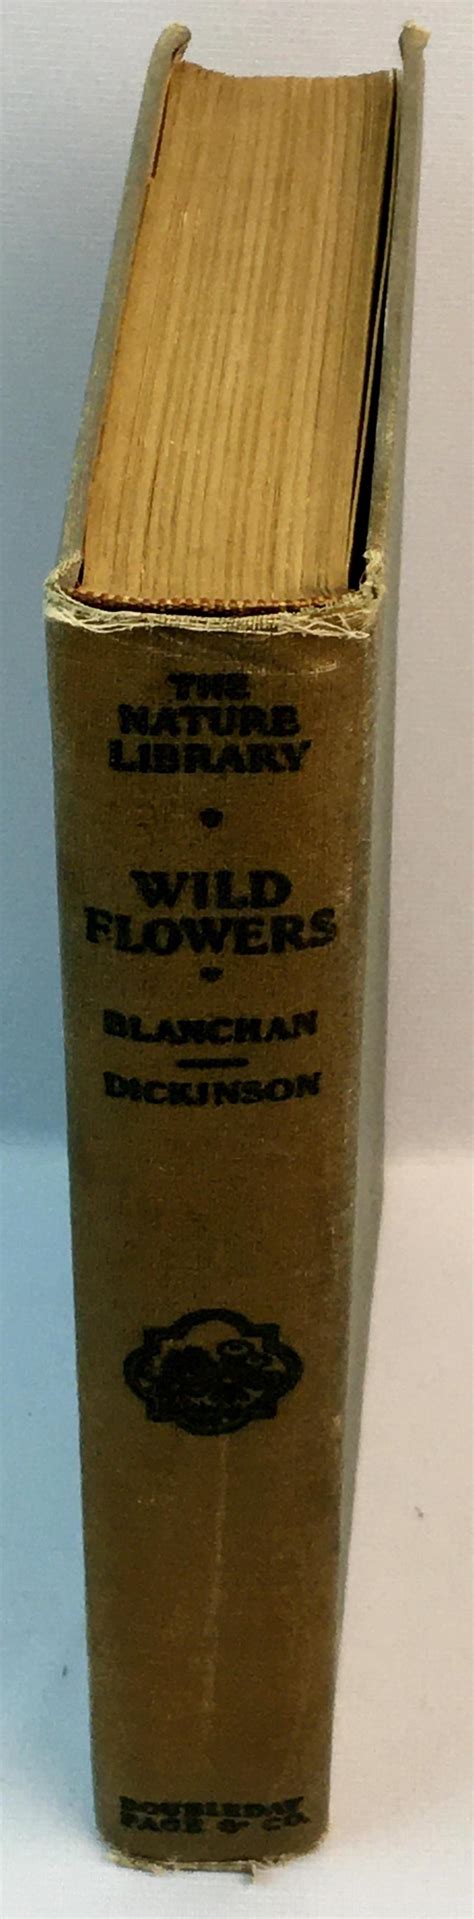 Lot 1926 The Nature Library Wild Flowers By Neltje Blanchan Illustrated